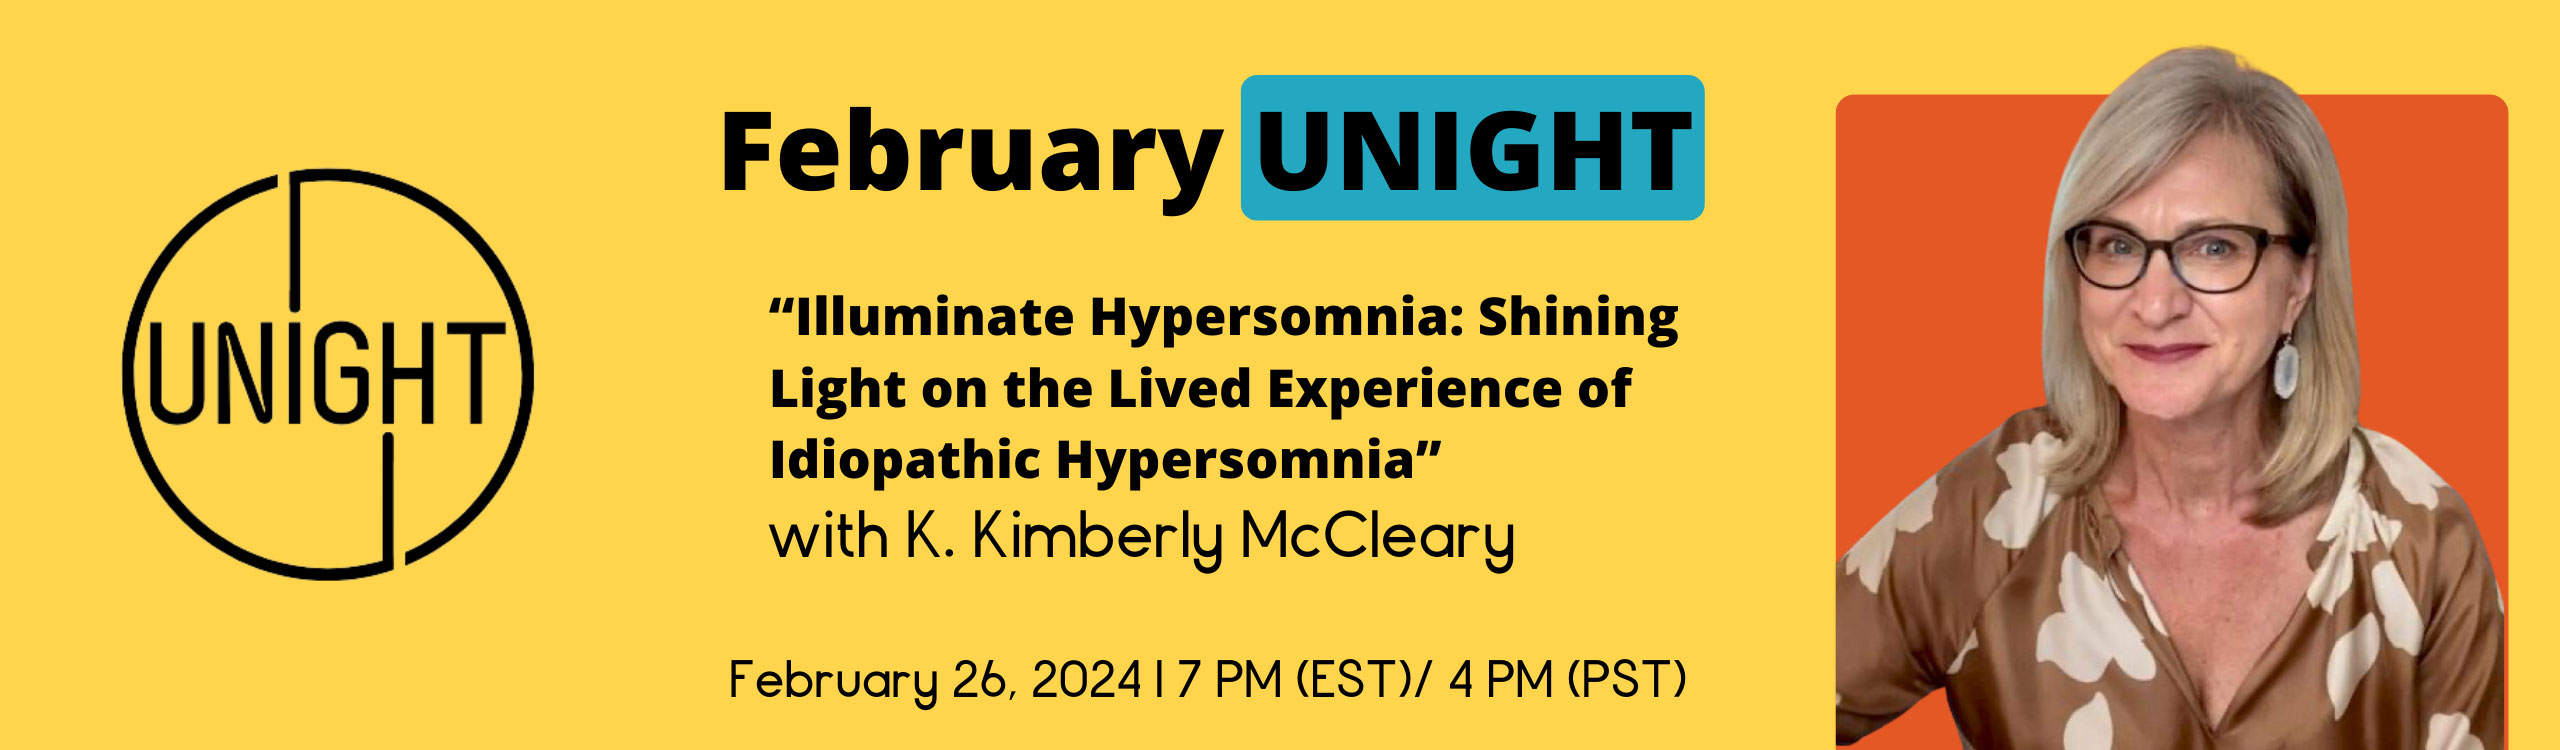 February UNIGHT | "Illuminate Hypersomnia: Shining Light on the Lived Experience of Idiopathic Hypersomnia" with K. Kimberly McCleary | February 26, 2024 | 7 PM (EST) / 4 PM (PST)